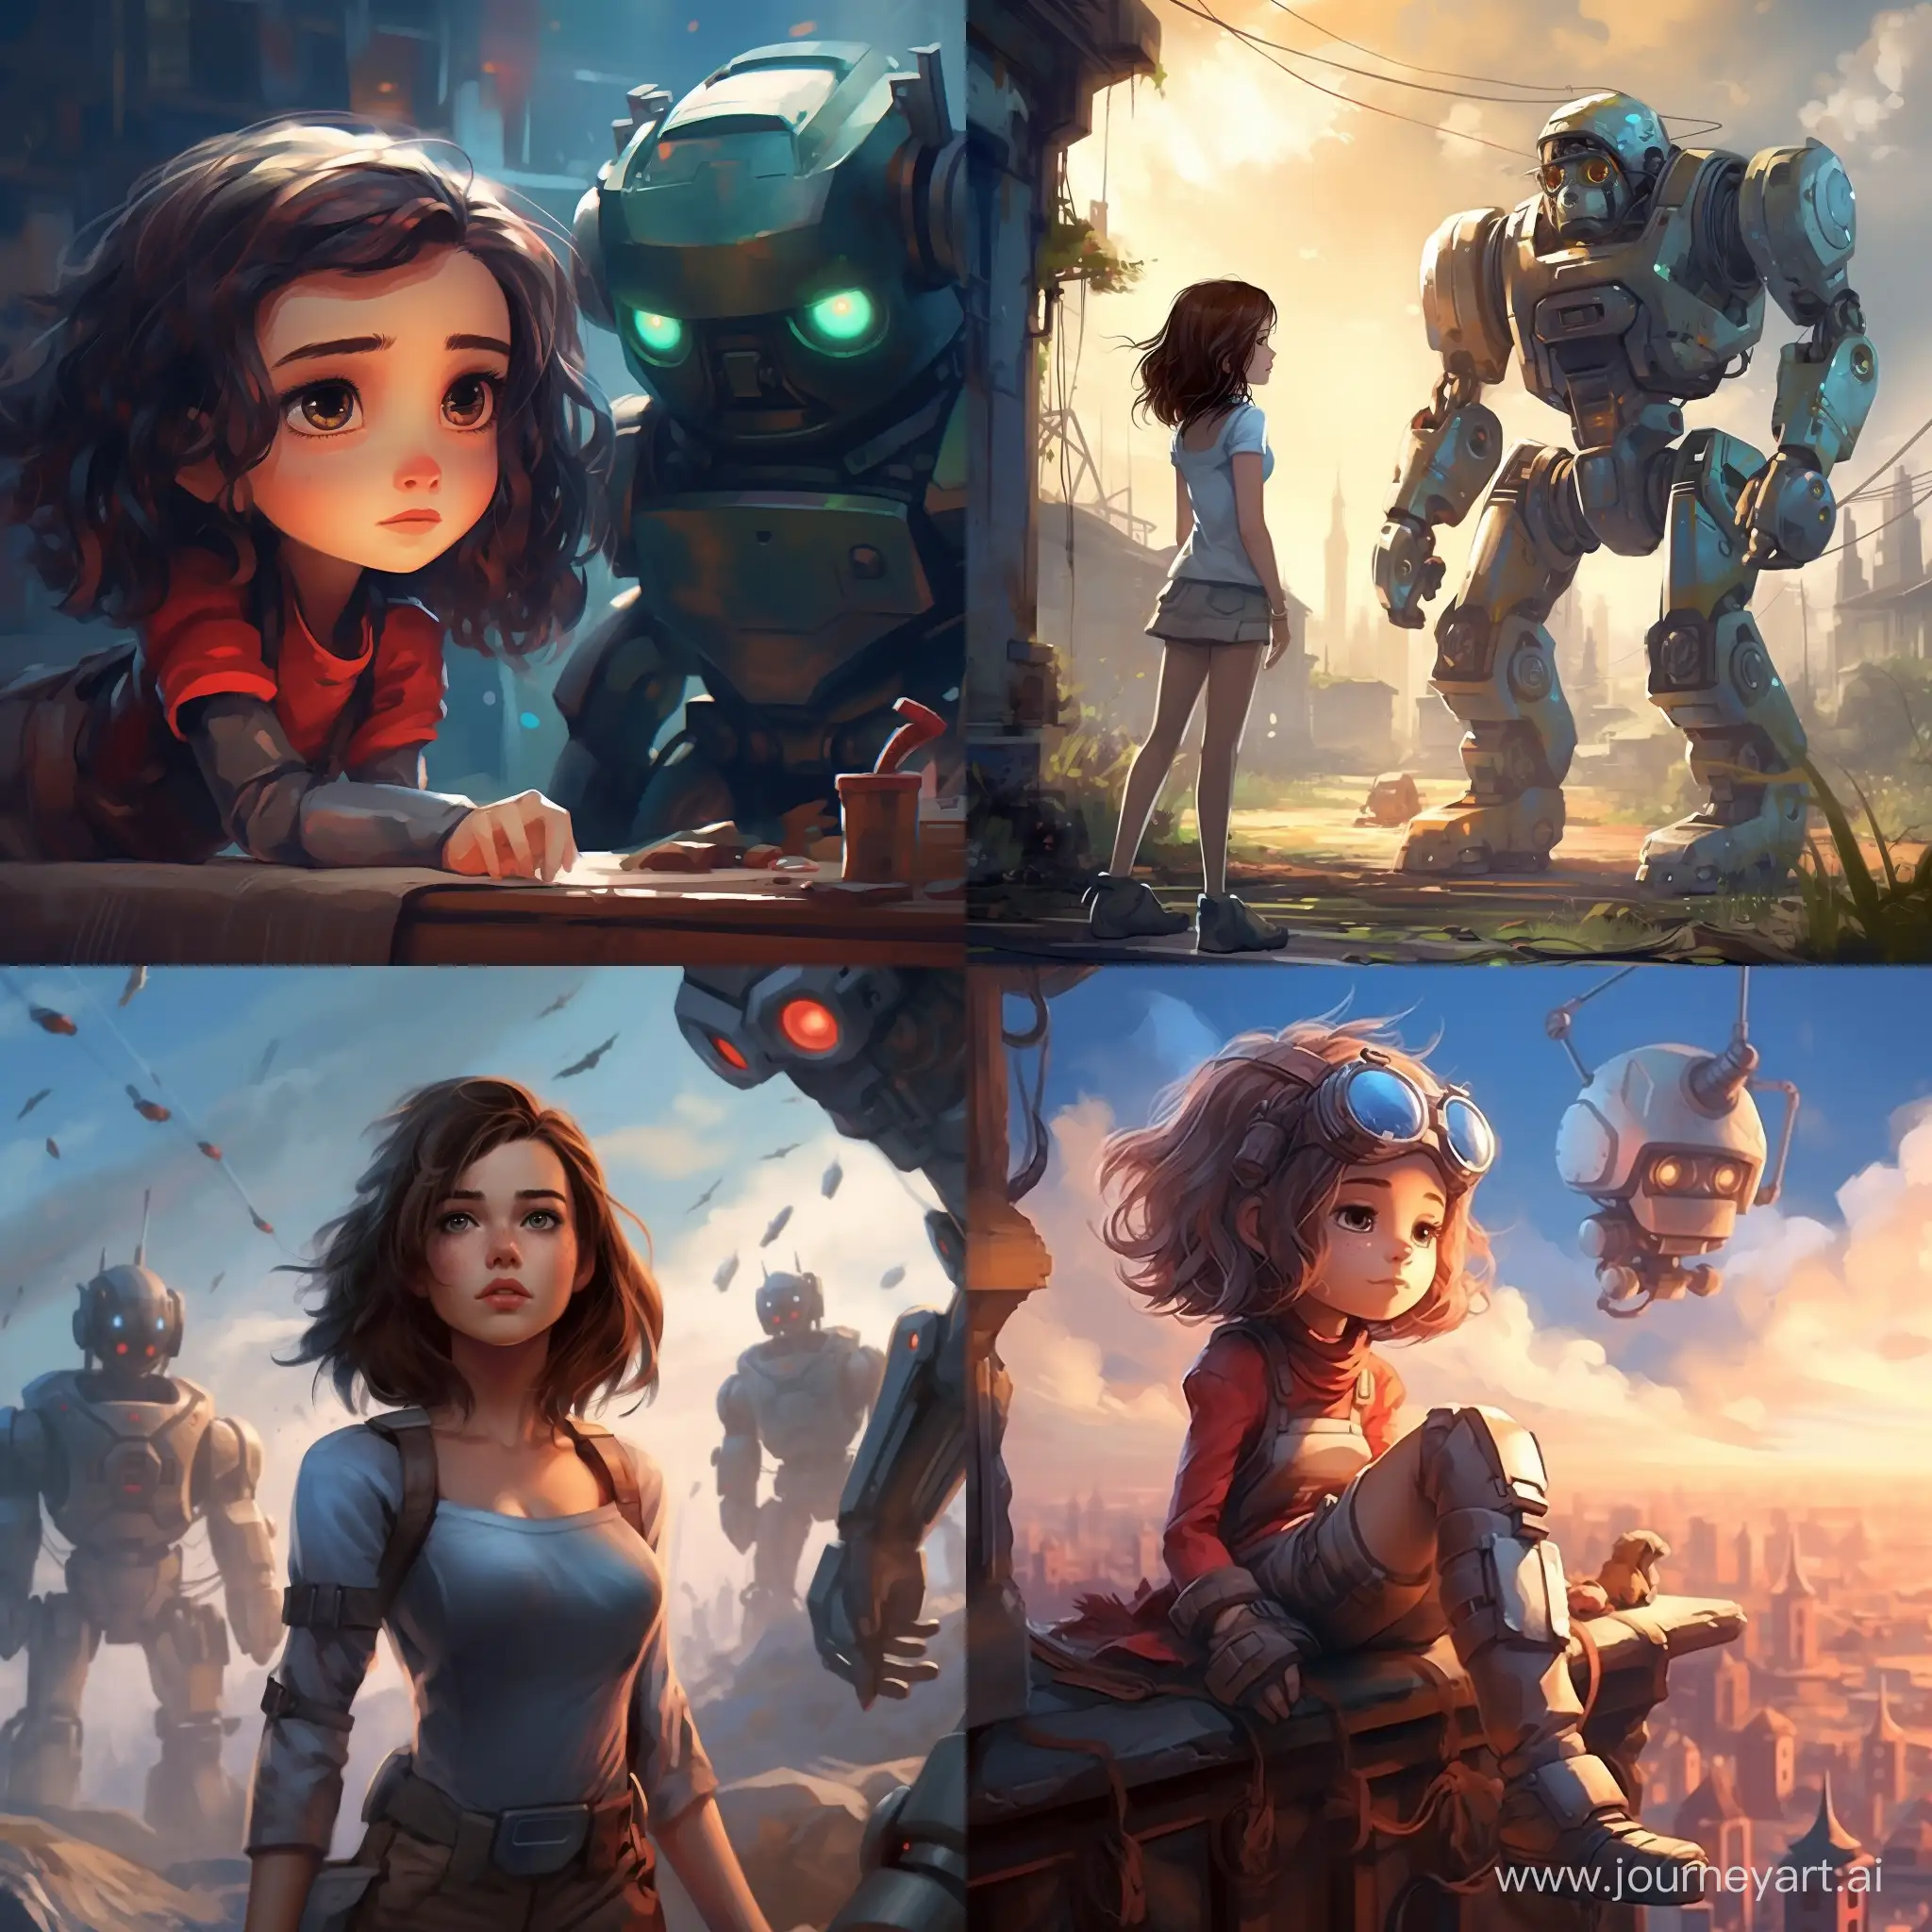 Adorable-Robot-Girl-Named-Arnold-in-Atmospheric-Perspective